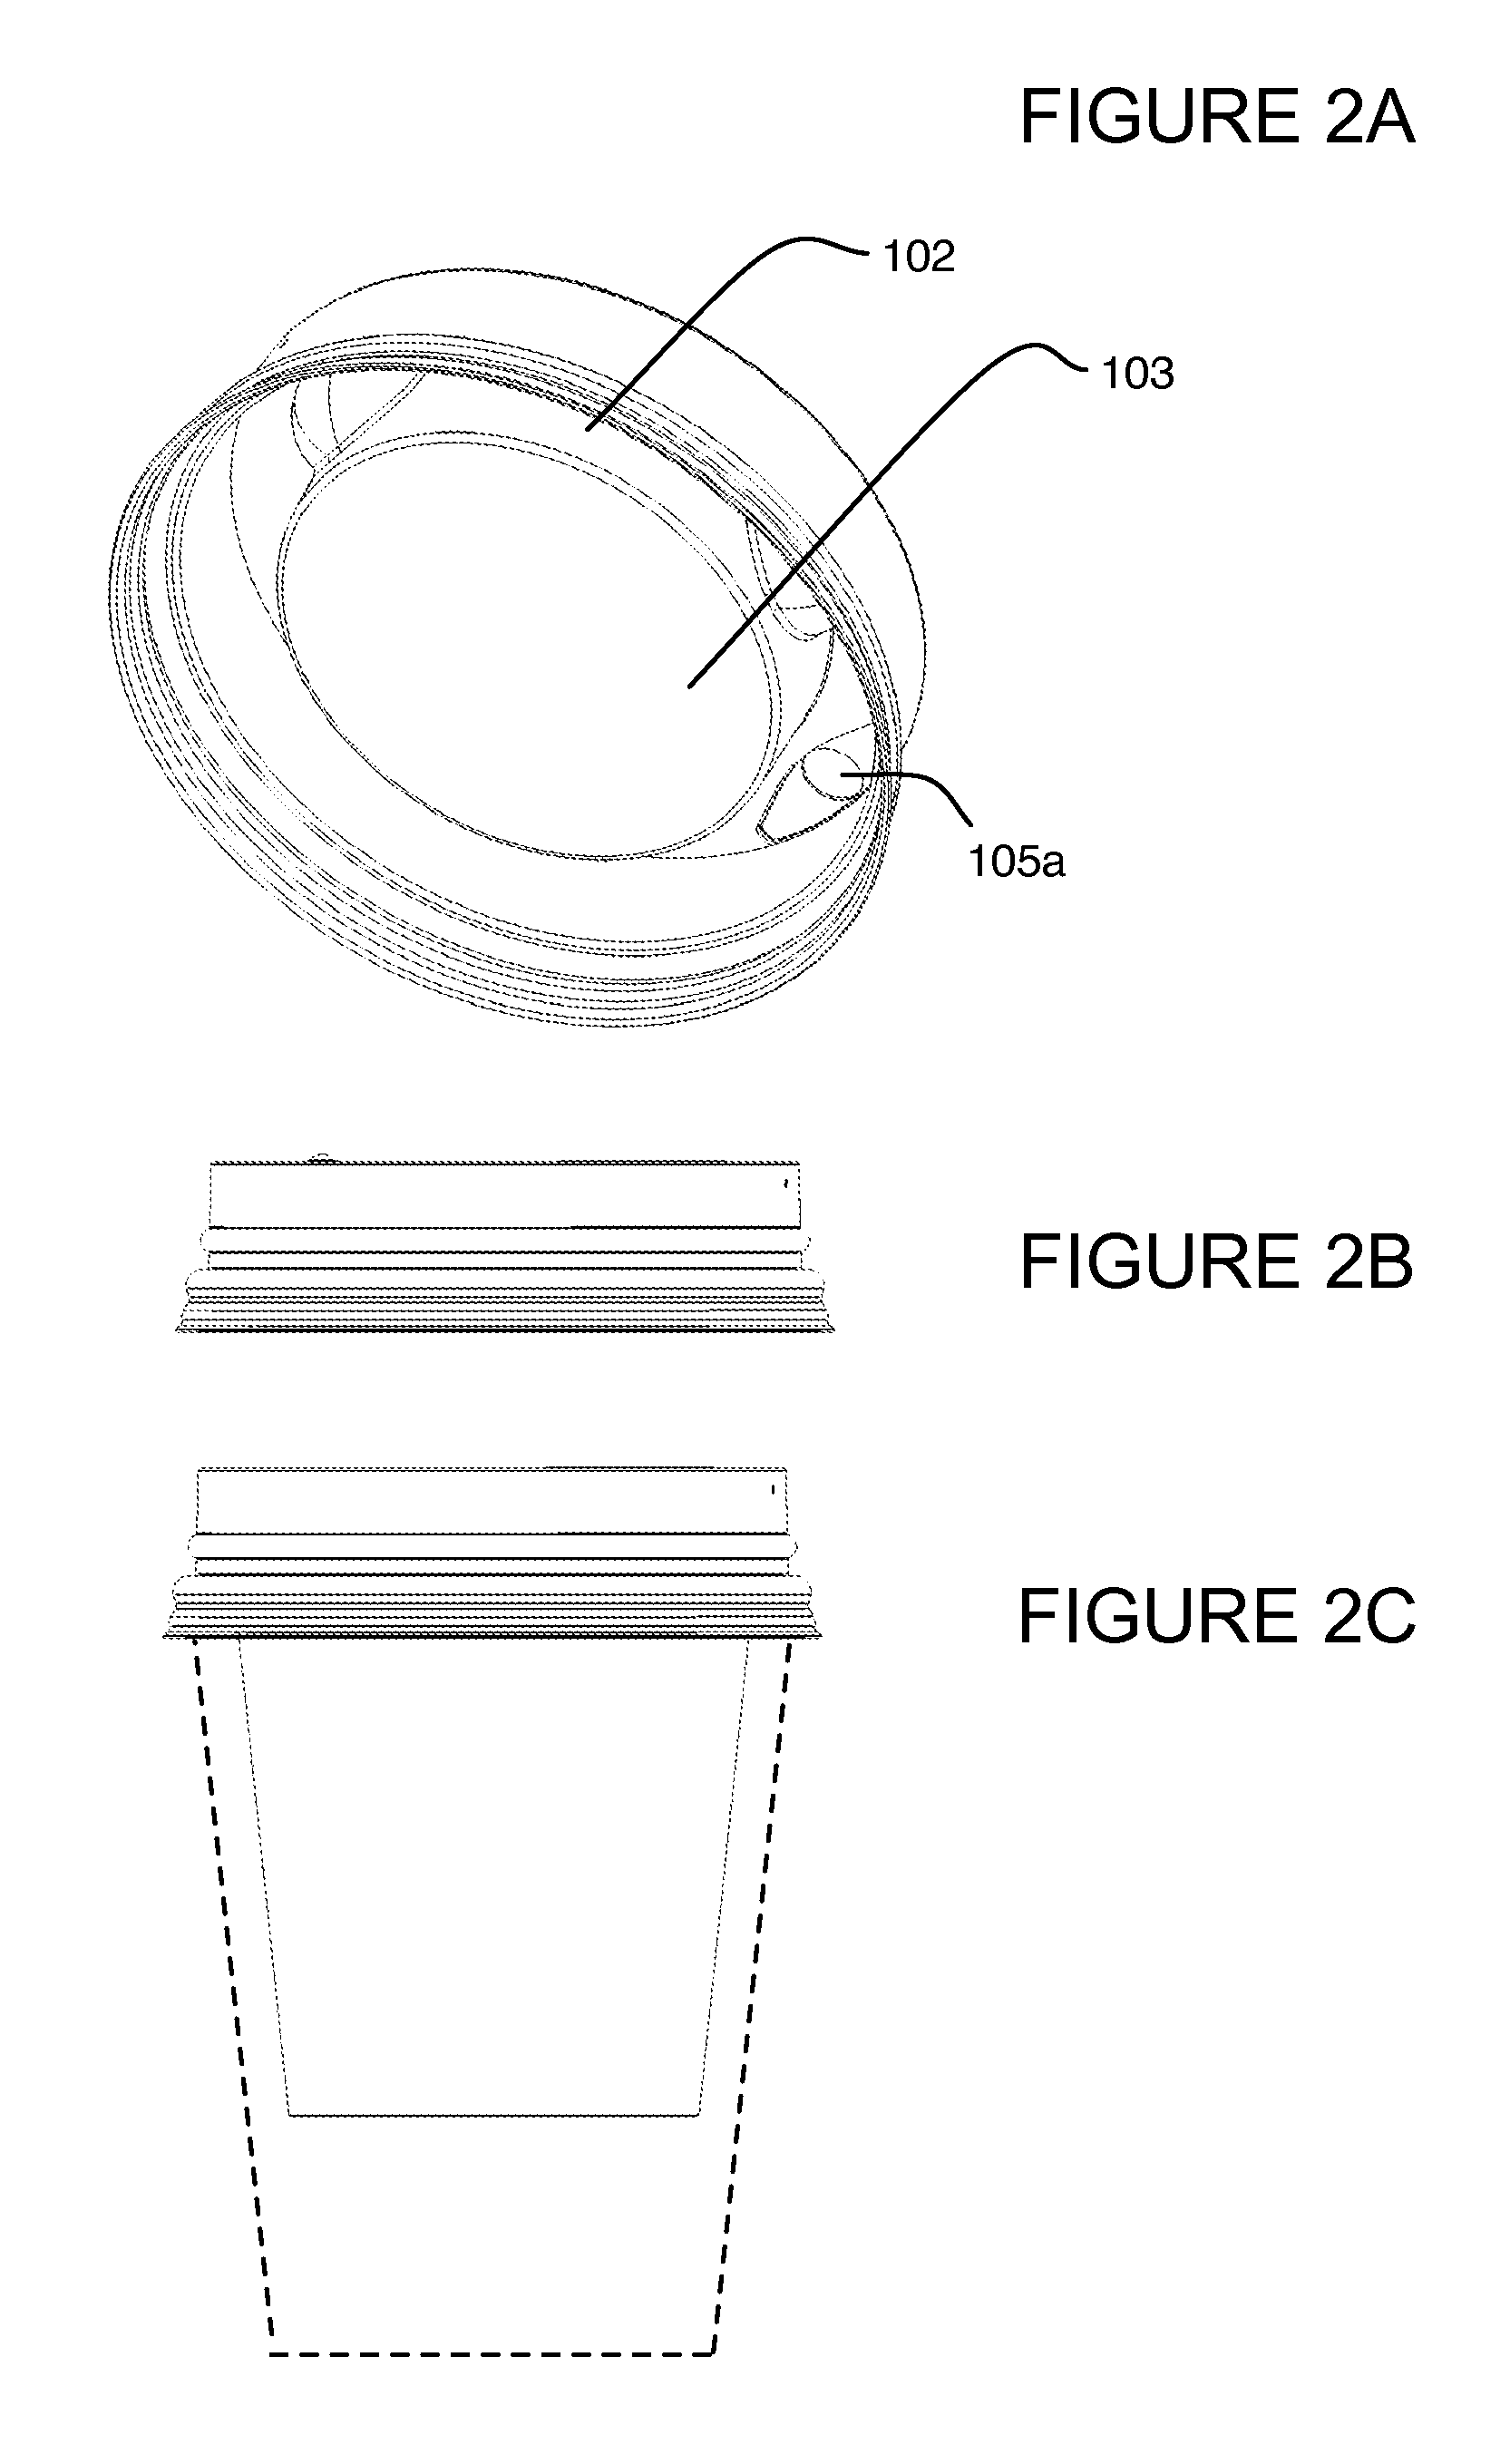 Cup lid with integrated container